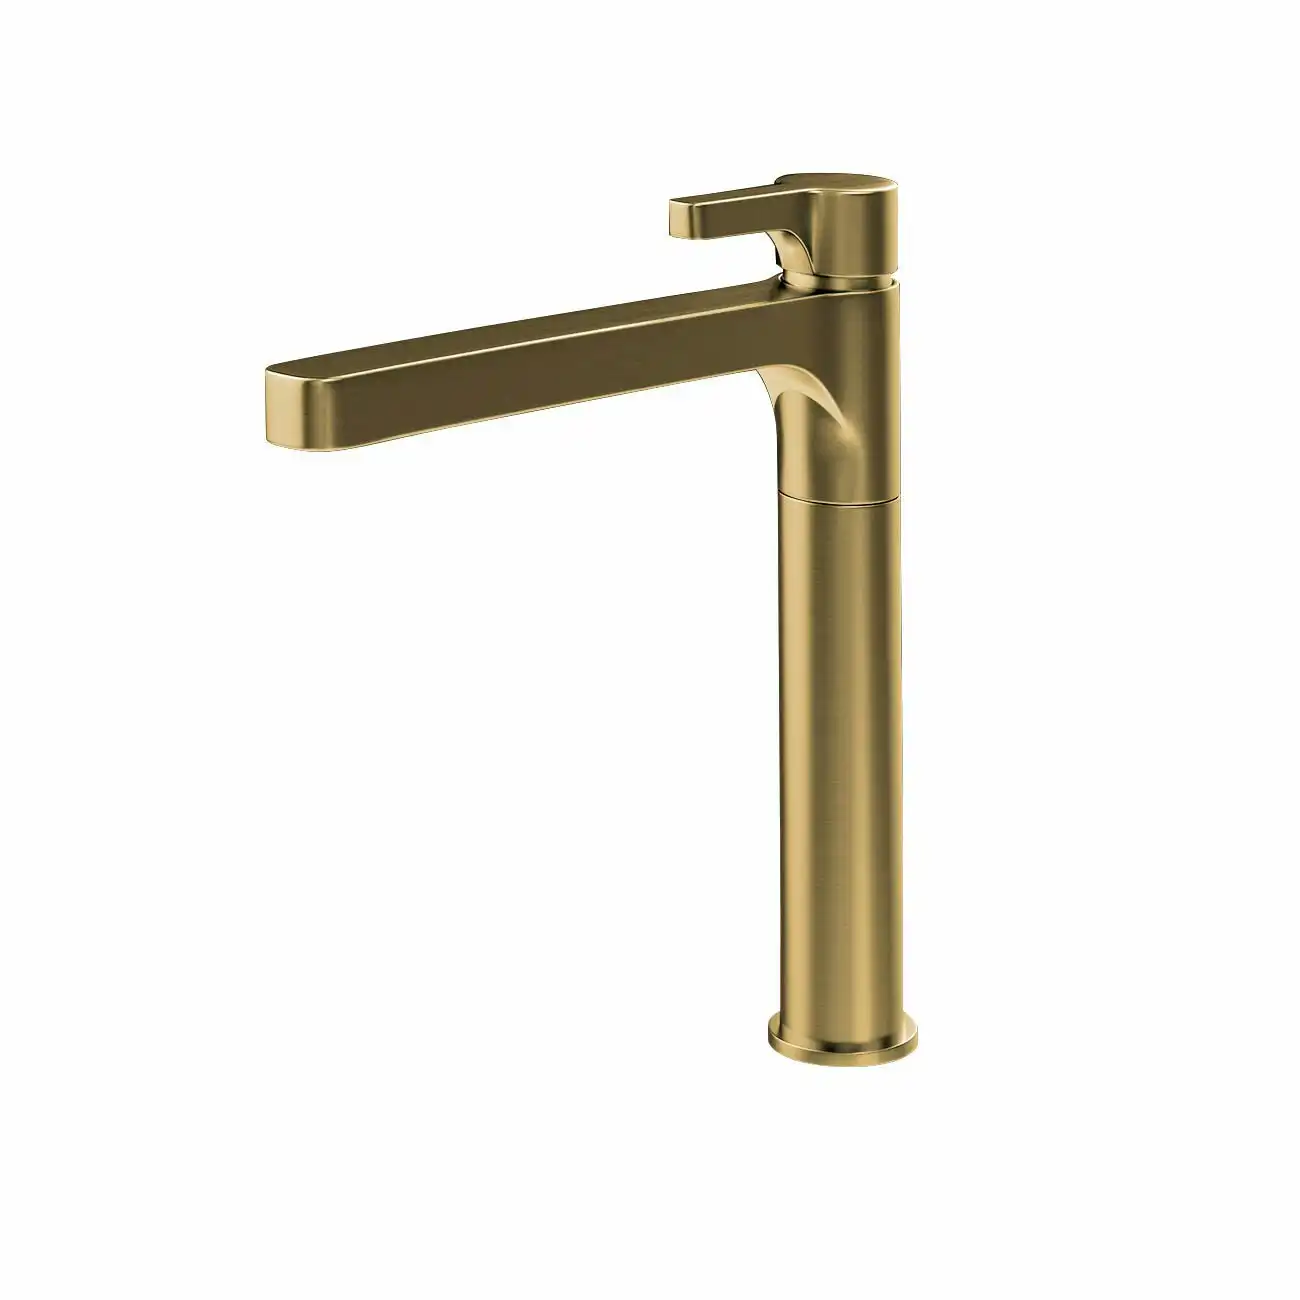 Rogerseller Arq ii Sink Mixer Tap - Brushed Gold